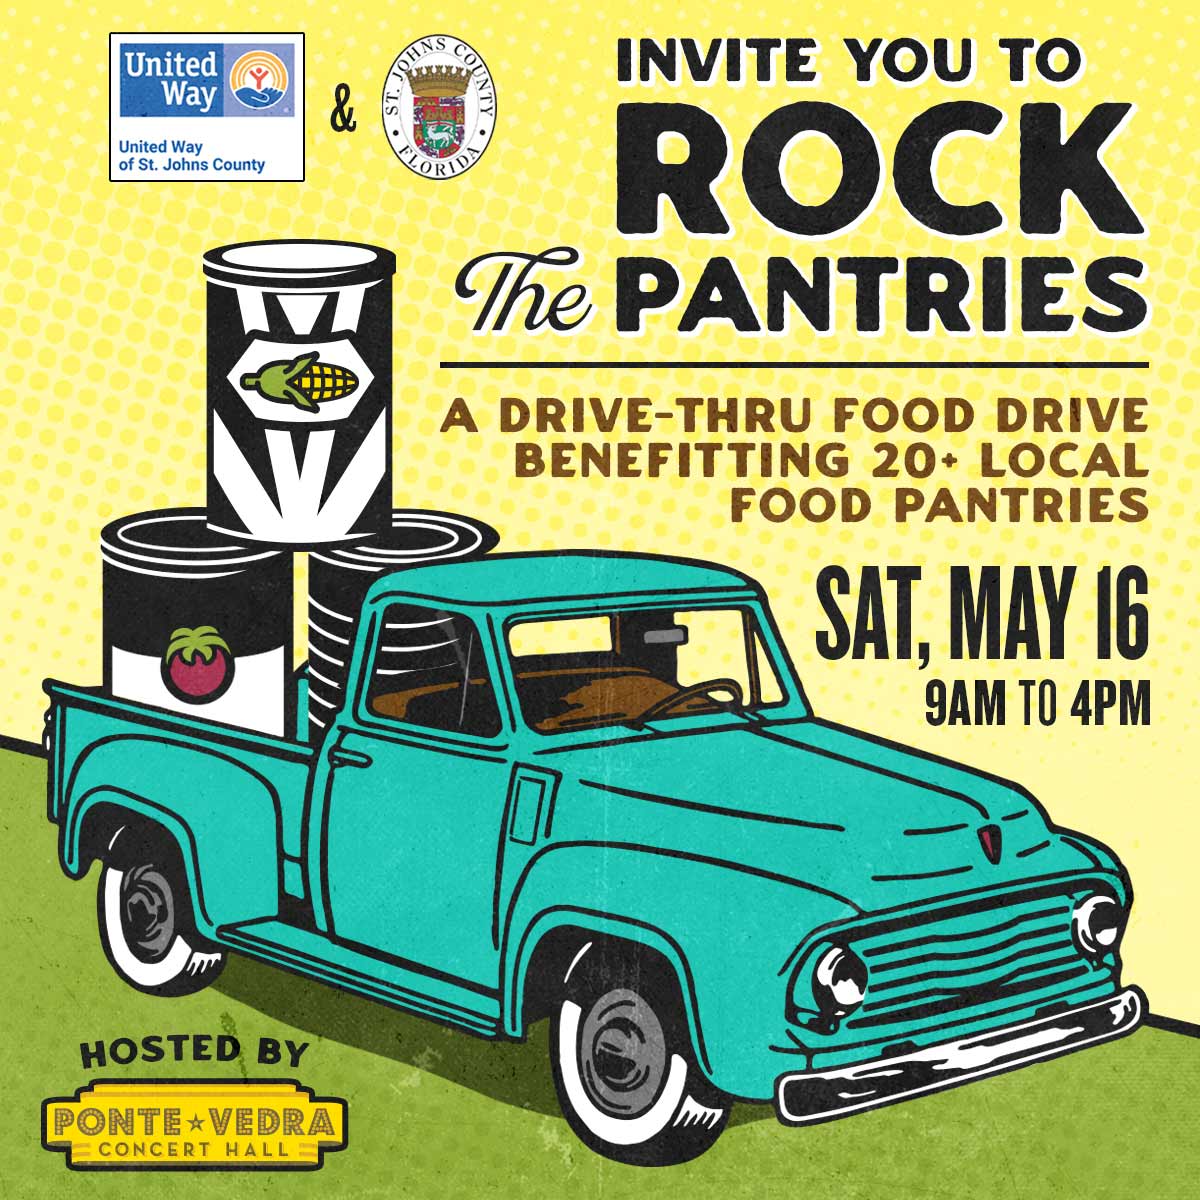 Friendly reminder! The second and final weekend of the ROCK the Pantries: A 'Drive-Thru' Food Drive will take place tomorrow, Saturday, May 16 at the Ponte Vedra Concert Hall from 9am-4pm! We hope to see you there!